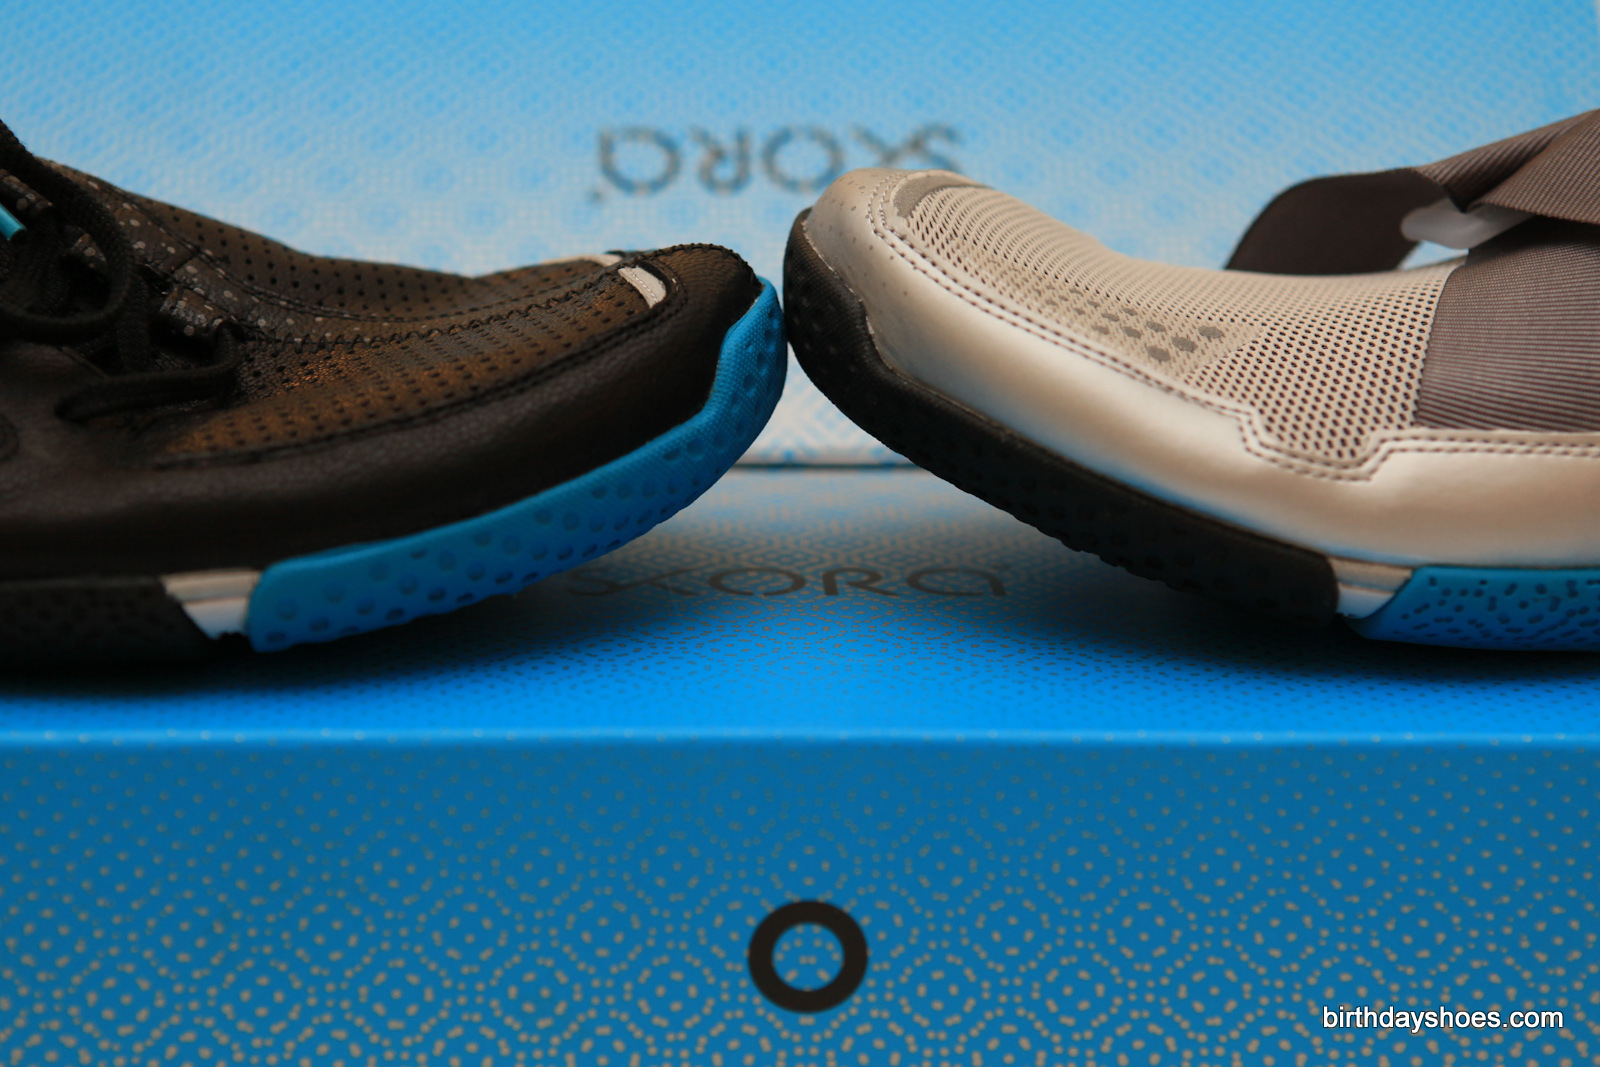 The Skora Base on the right has noticeably more toe spring (lift at the end of the shoe) than the Skora Form (left).